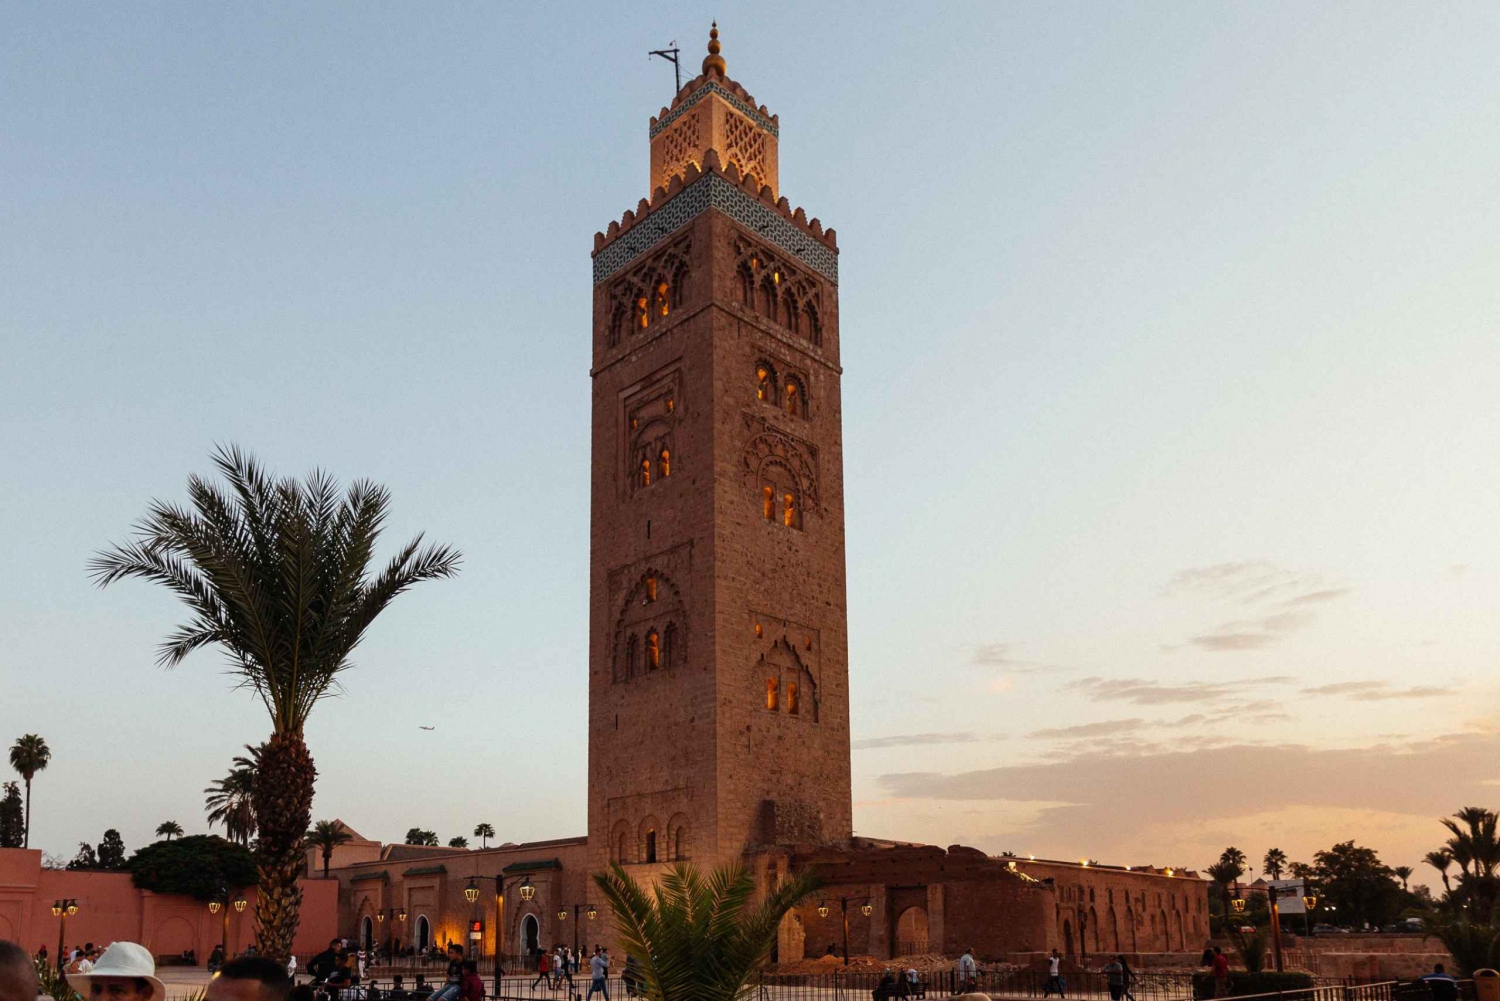 Marrakech Magic 3-Hour Private Night-Time Tour